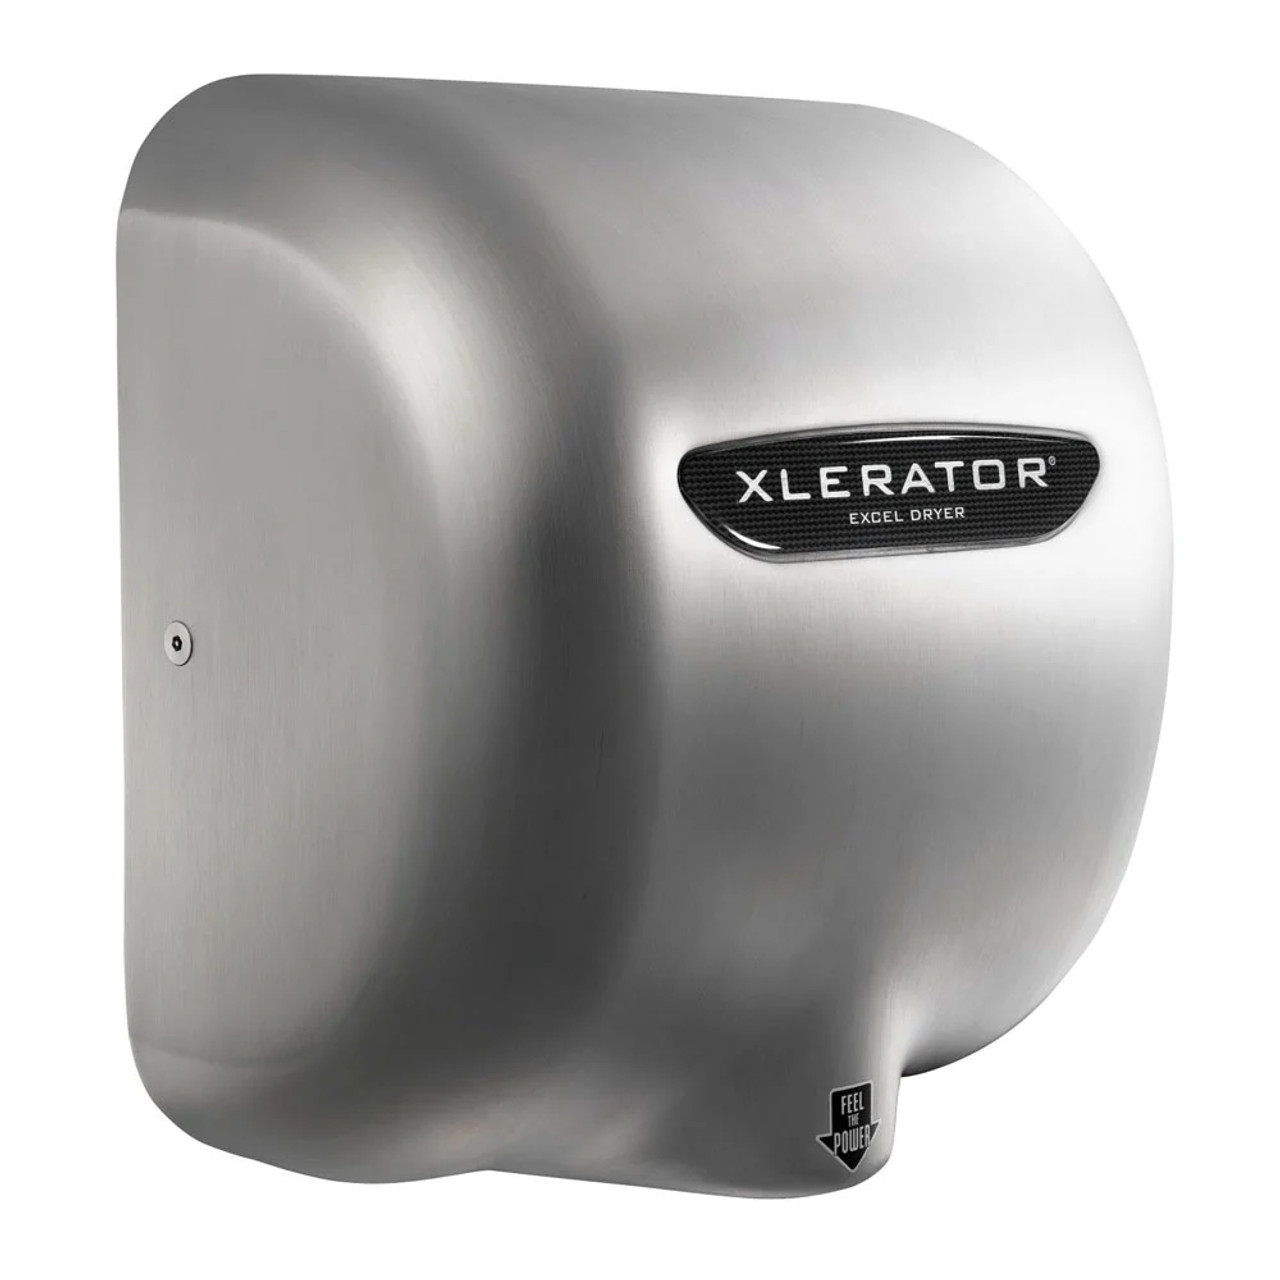 Excel Dryer Automatic Hand Dryer - 8 Second Dry Time, Noise Reduction, 110-120V - Chicken Pieces